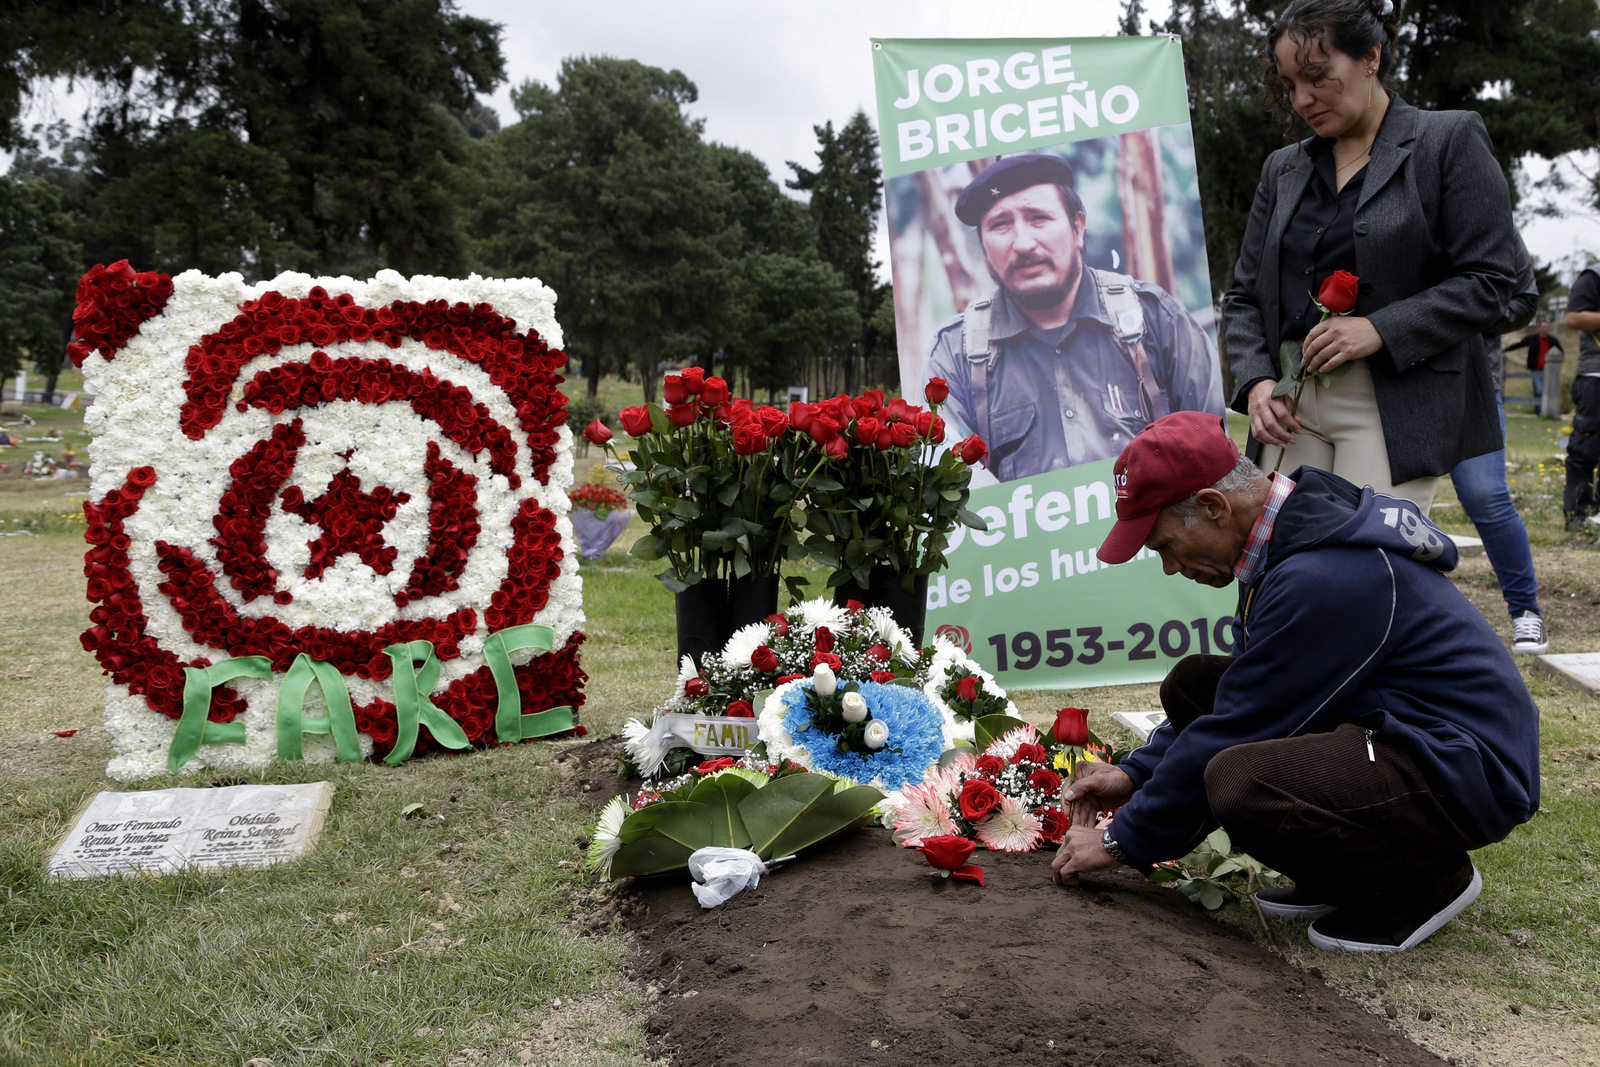 A man places flowers on the grave of slain rebel leader Jorge Briceno, known as Mono Jojoy, during an homage of former members of the Revolutionary Armed Forces of Colombia, FARC, at a cemetery in southern Bogota, Colombia, Sept. 22, 2017. Briceno was killed by the Colombian Army on Sep. 22, 2010. (AP/Ricardo Mazalan)